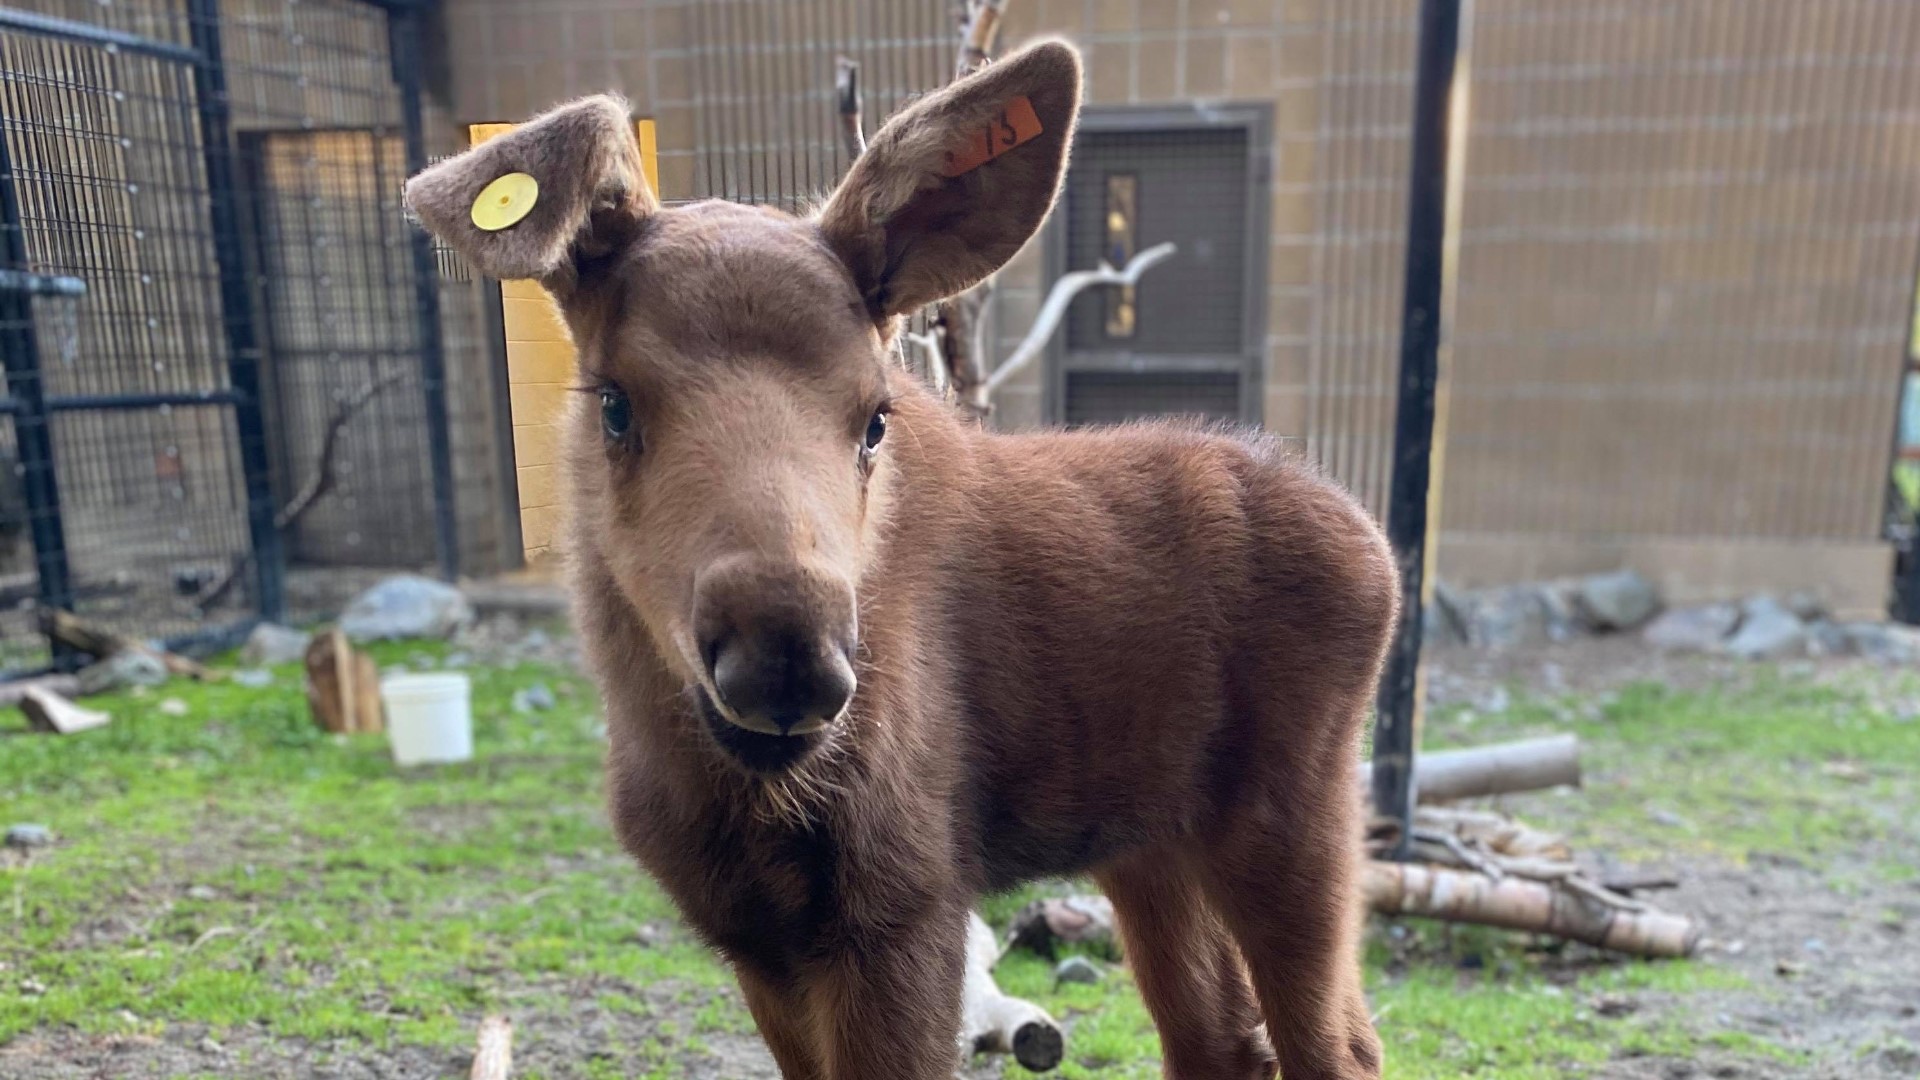 Orphaned 8-week-old Alaska Moose makes journey to new home at Cheyenne Mountain Zoo in Colorado Springs, Colo.